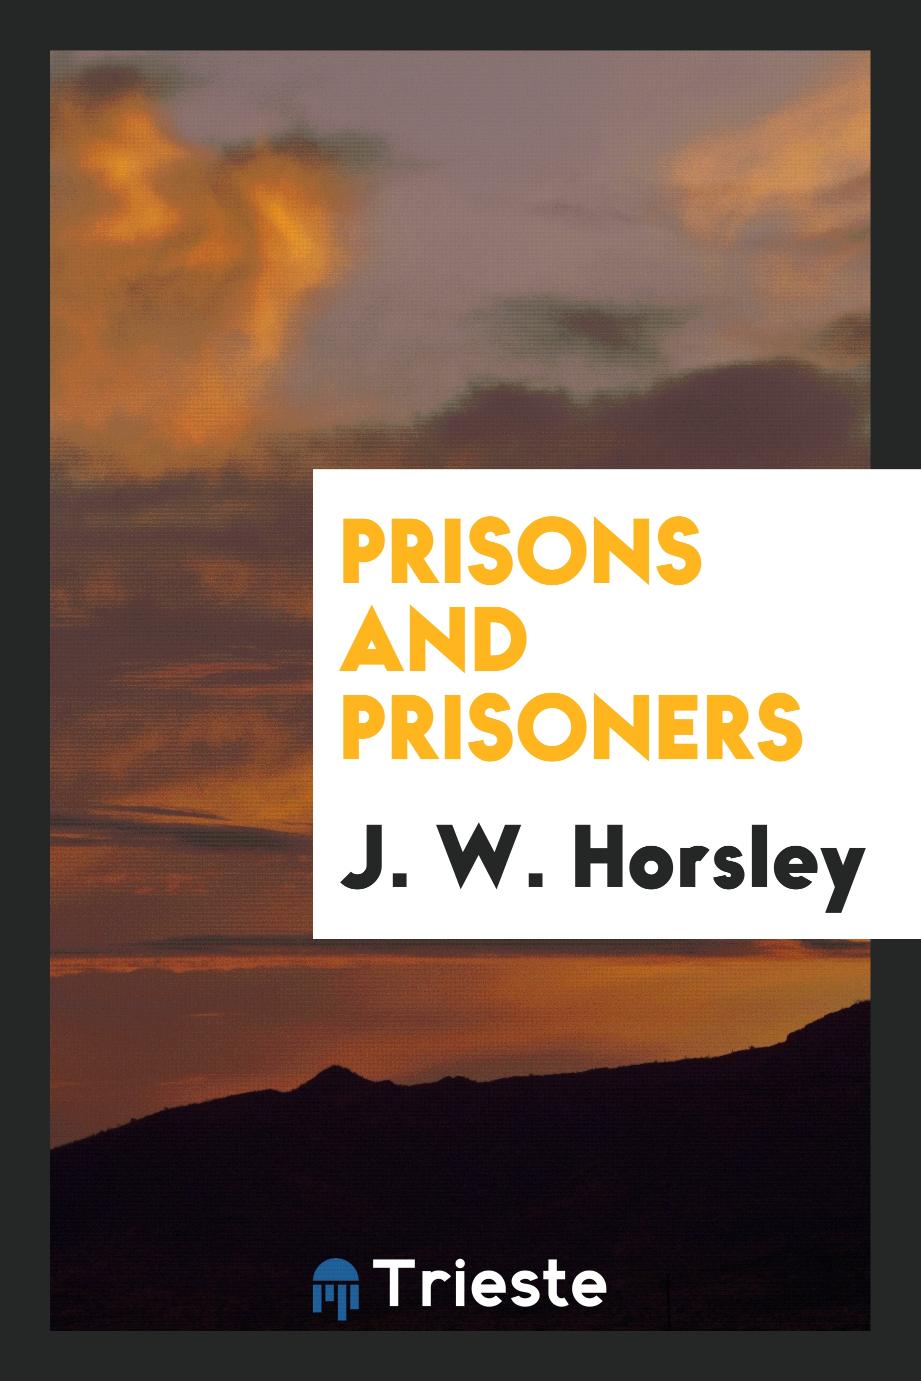 Prisons and prisoners